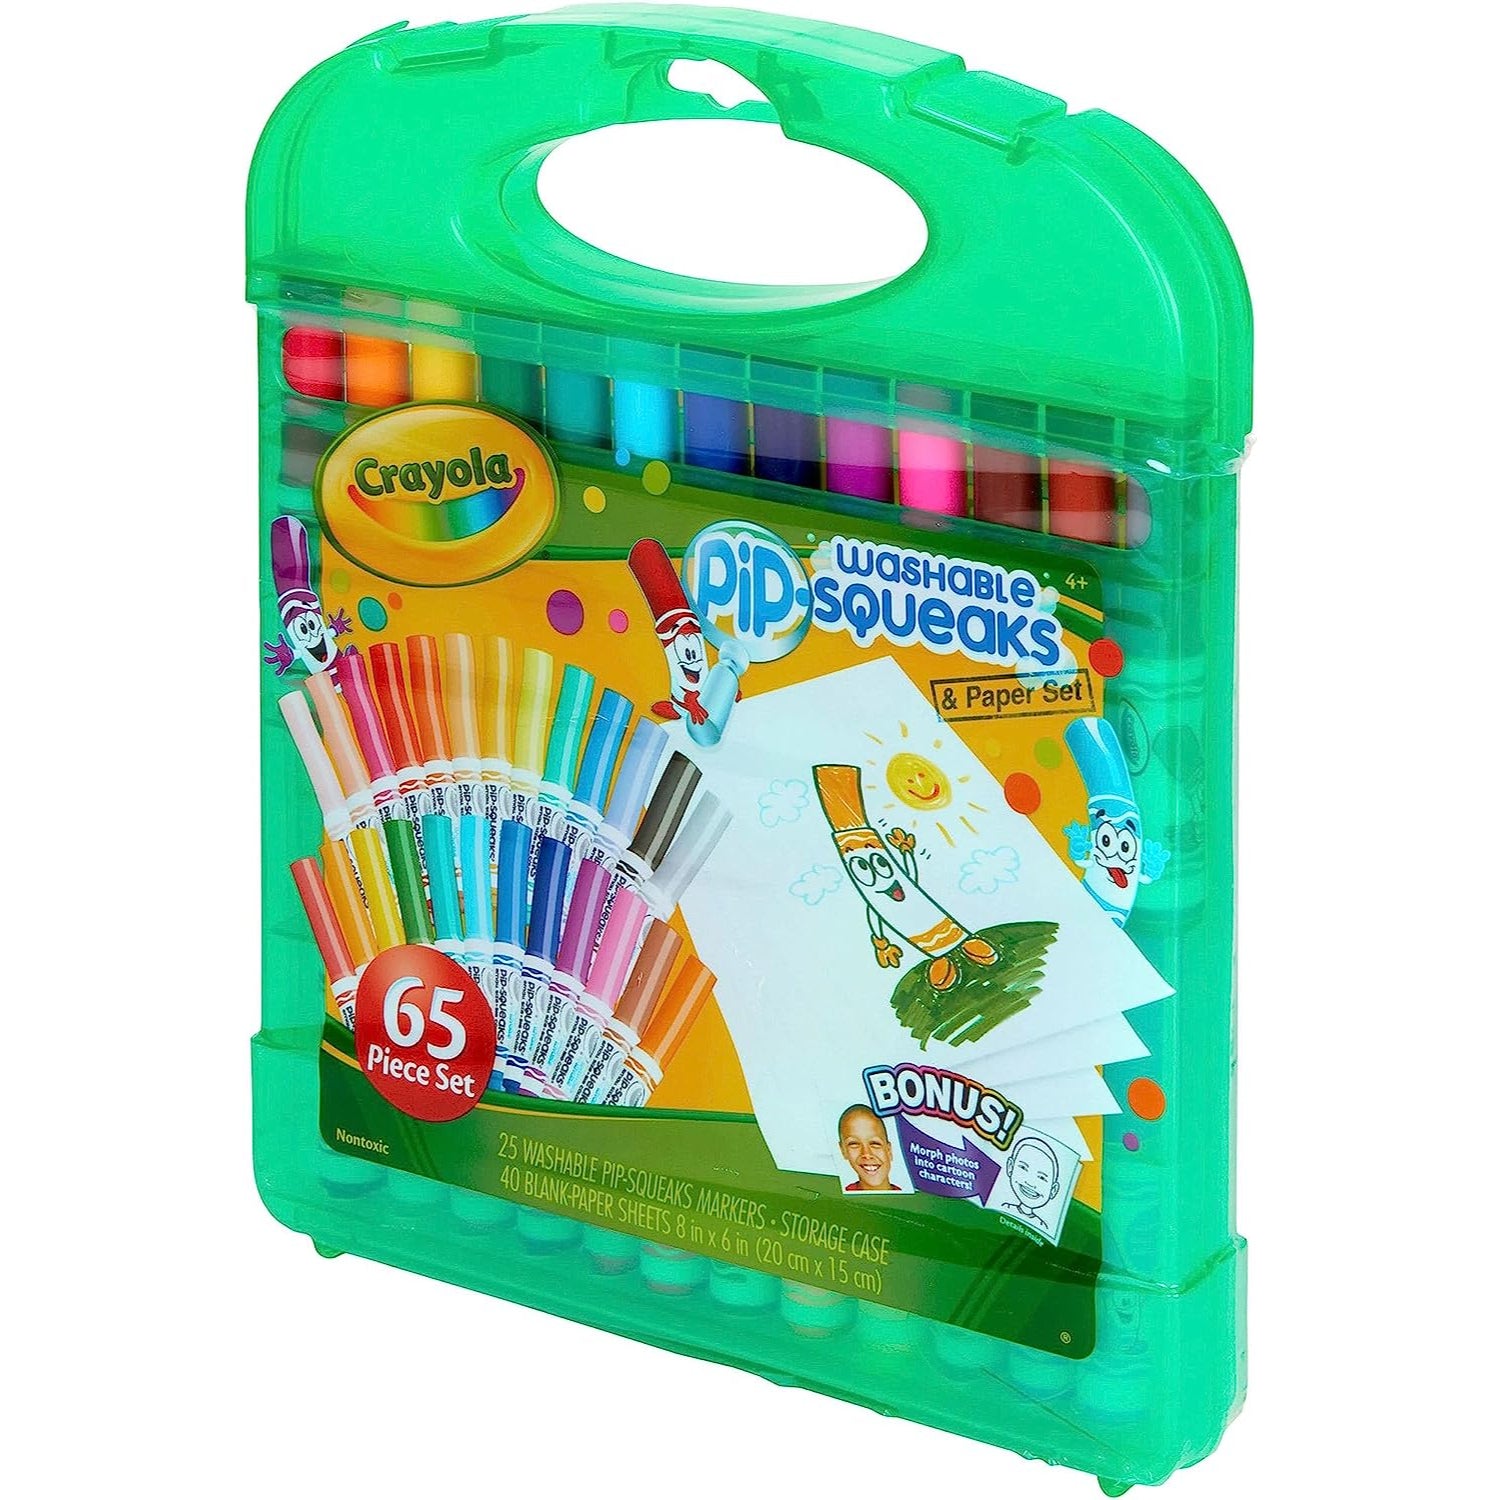 Pip-Squeaks Washable Markers Kit, Crayola.com